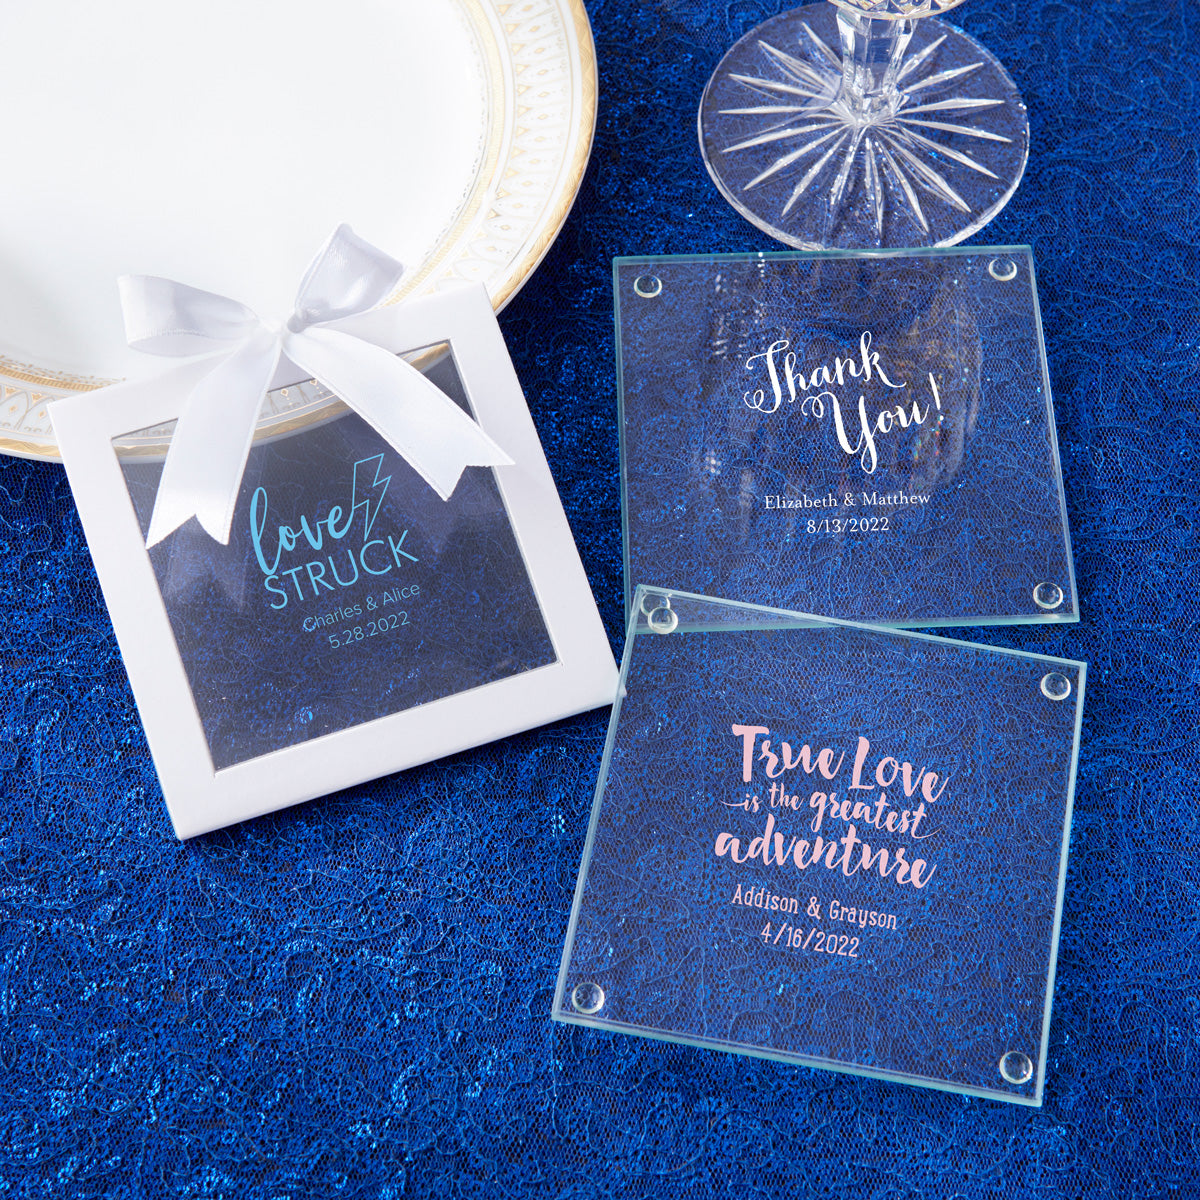 Personalized Glass Coaster (Set of 12) - Main Image0 | My Wedding Favors